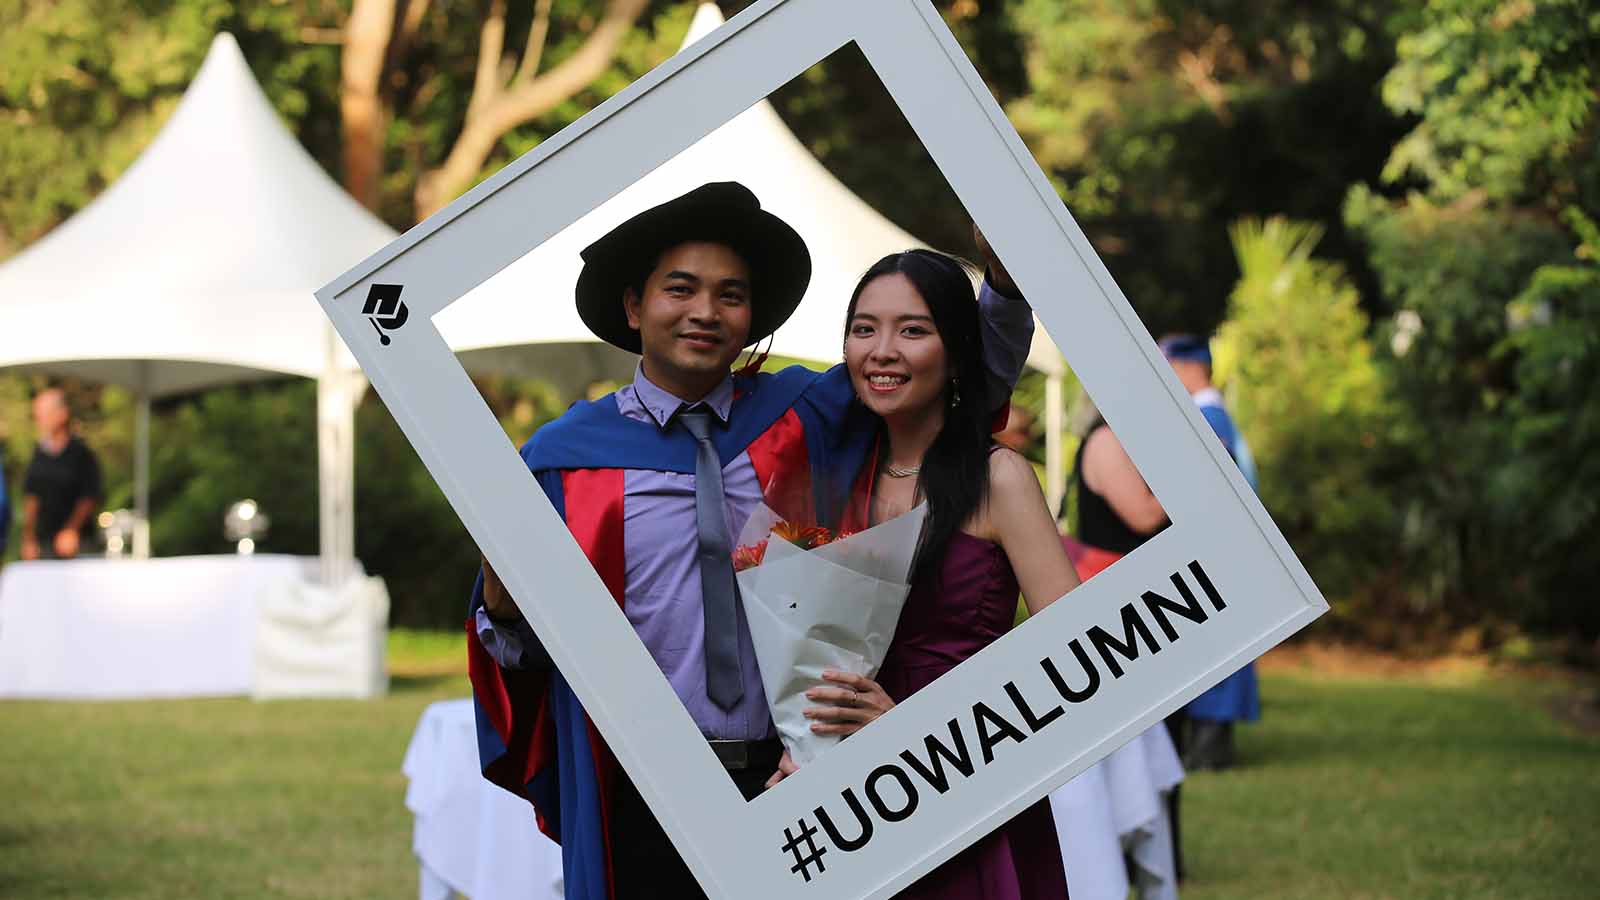 Dr Thong Pham is at his graduation with a woman, holding a corflute grame with #UOWALUMNI written on it